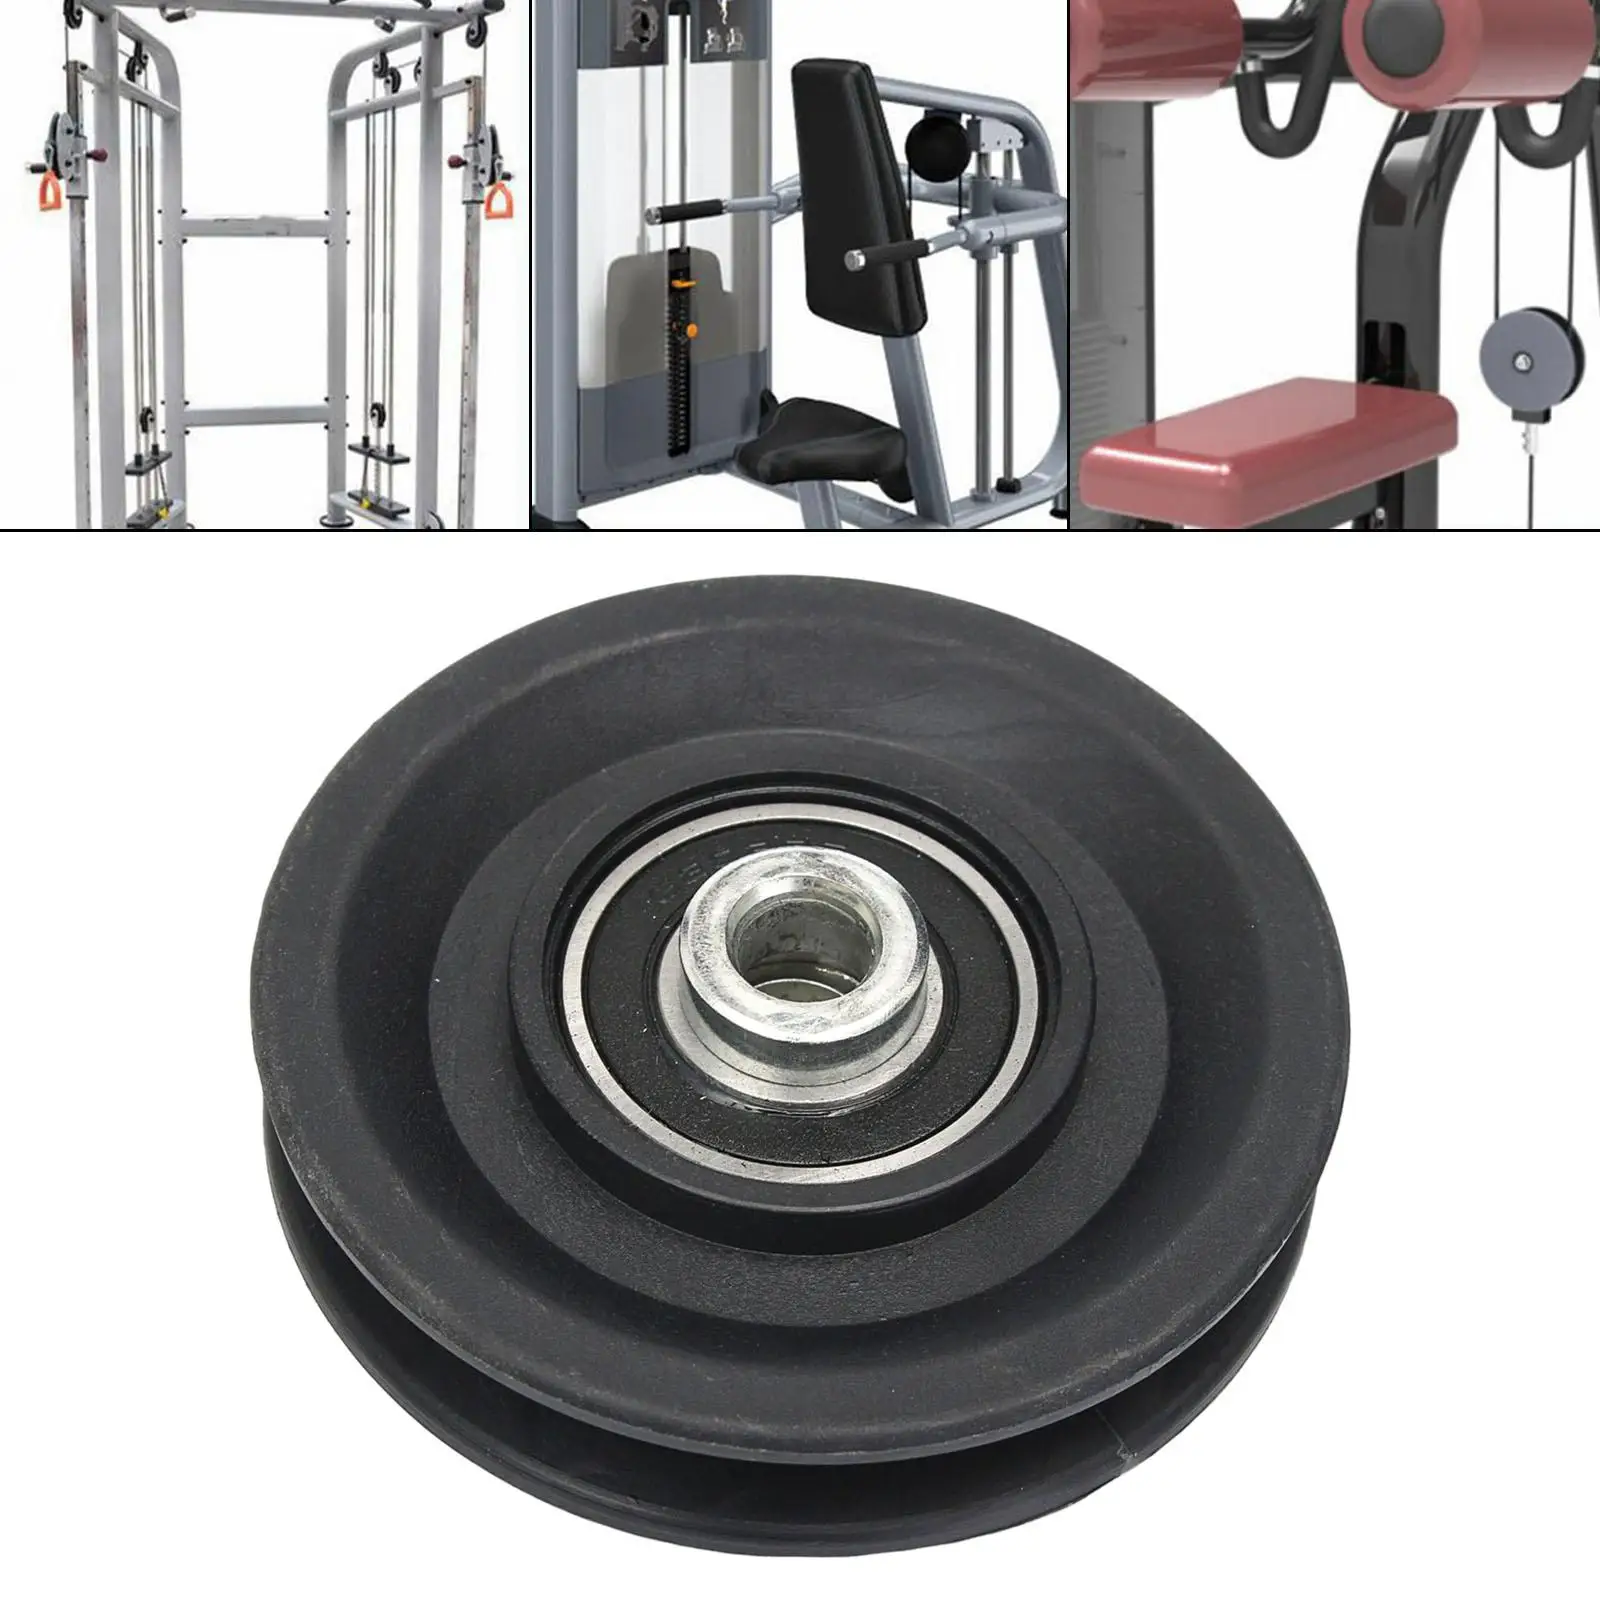 Pulley Wheel for Gym Equipment90mm/3.5